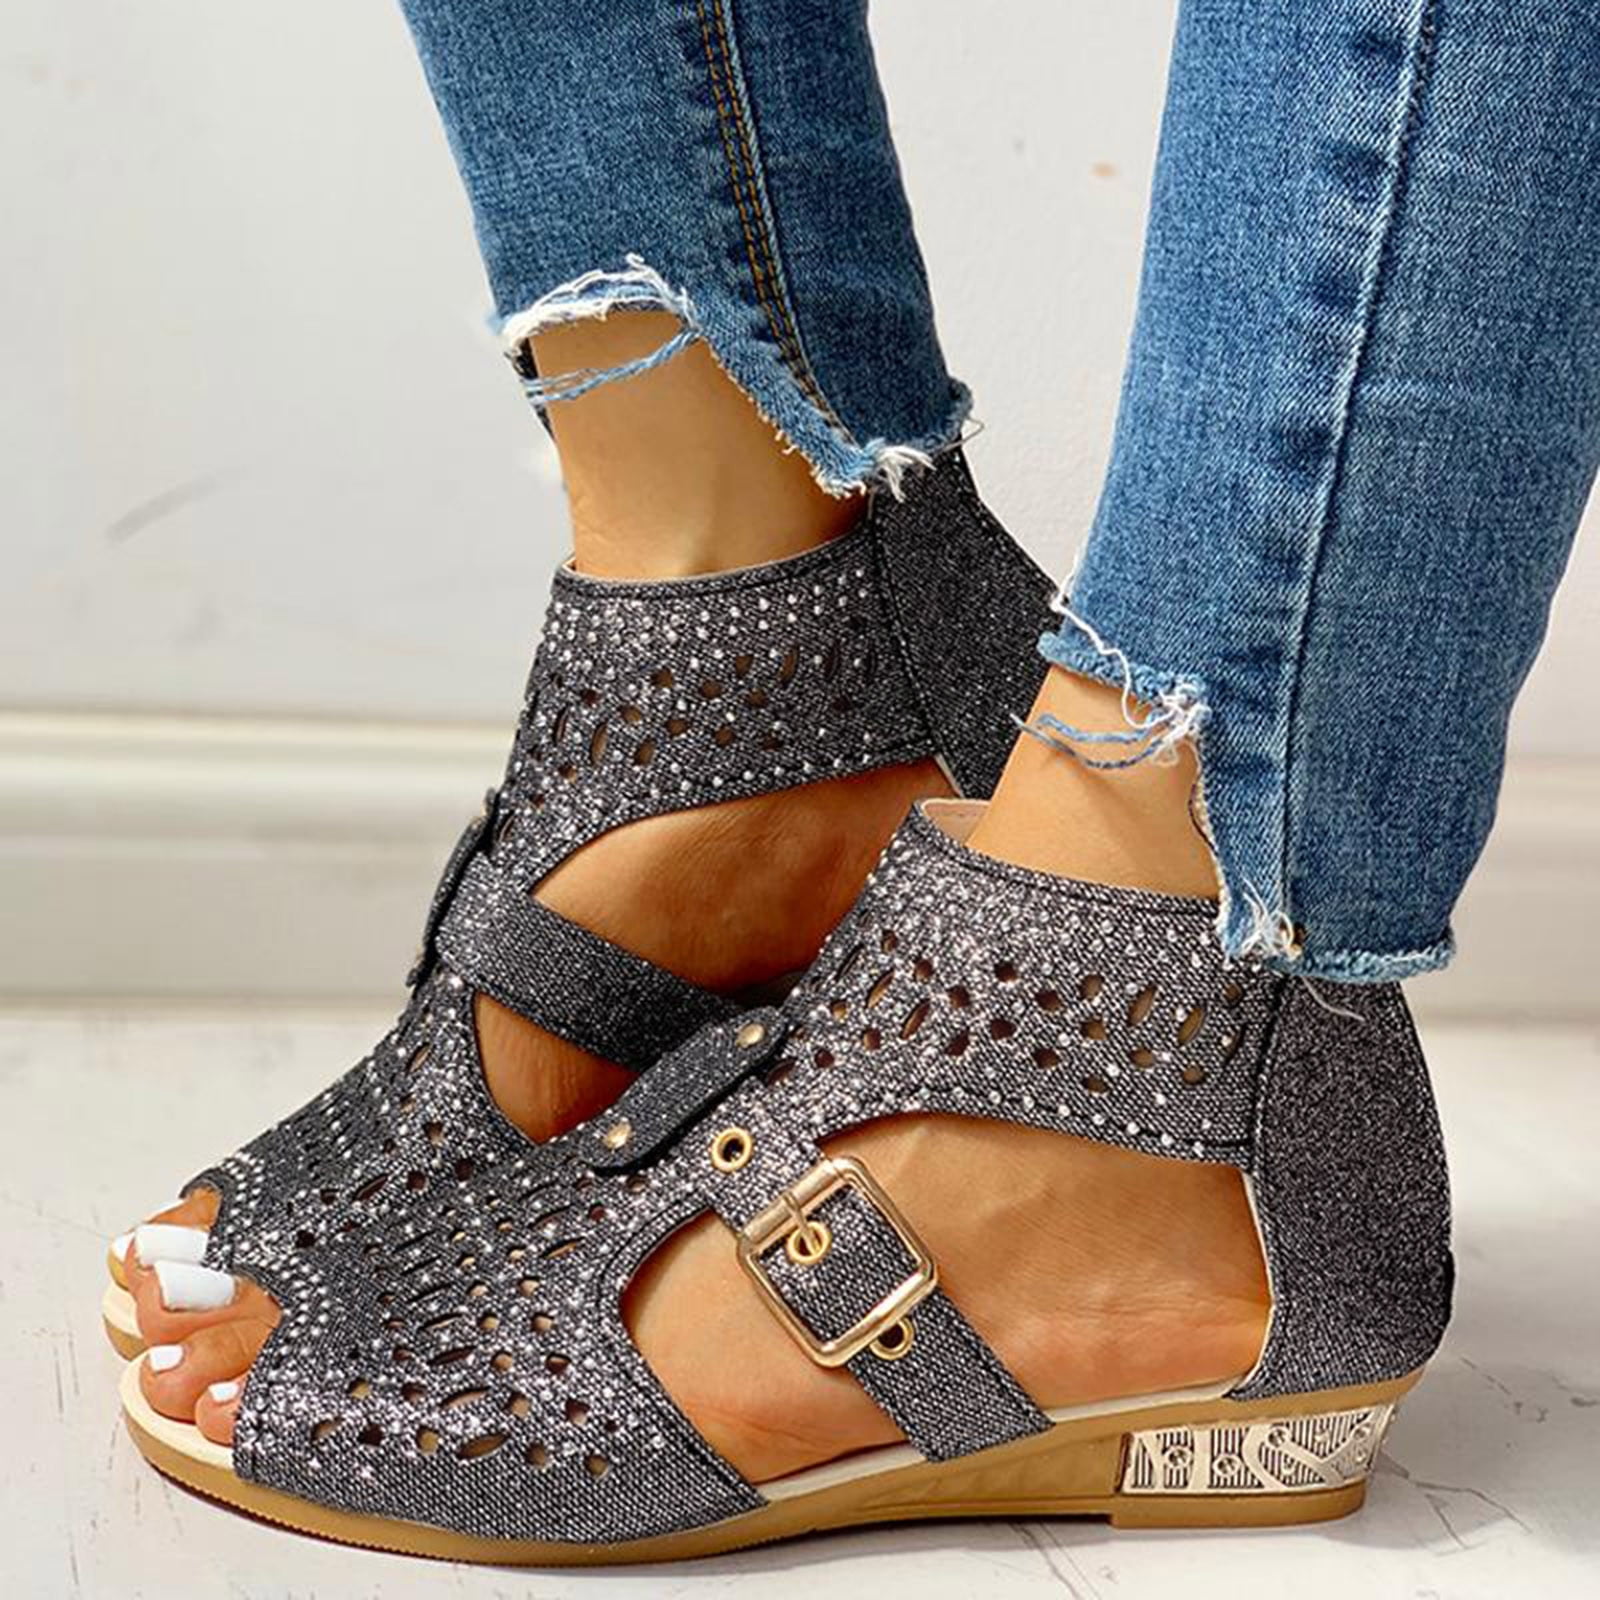 Latest Designs of Zip Up Sandals for Women – antelopeshoes